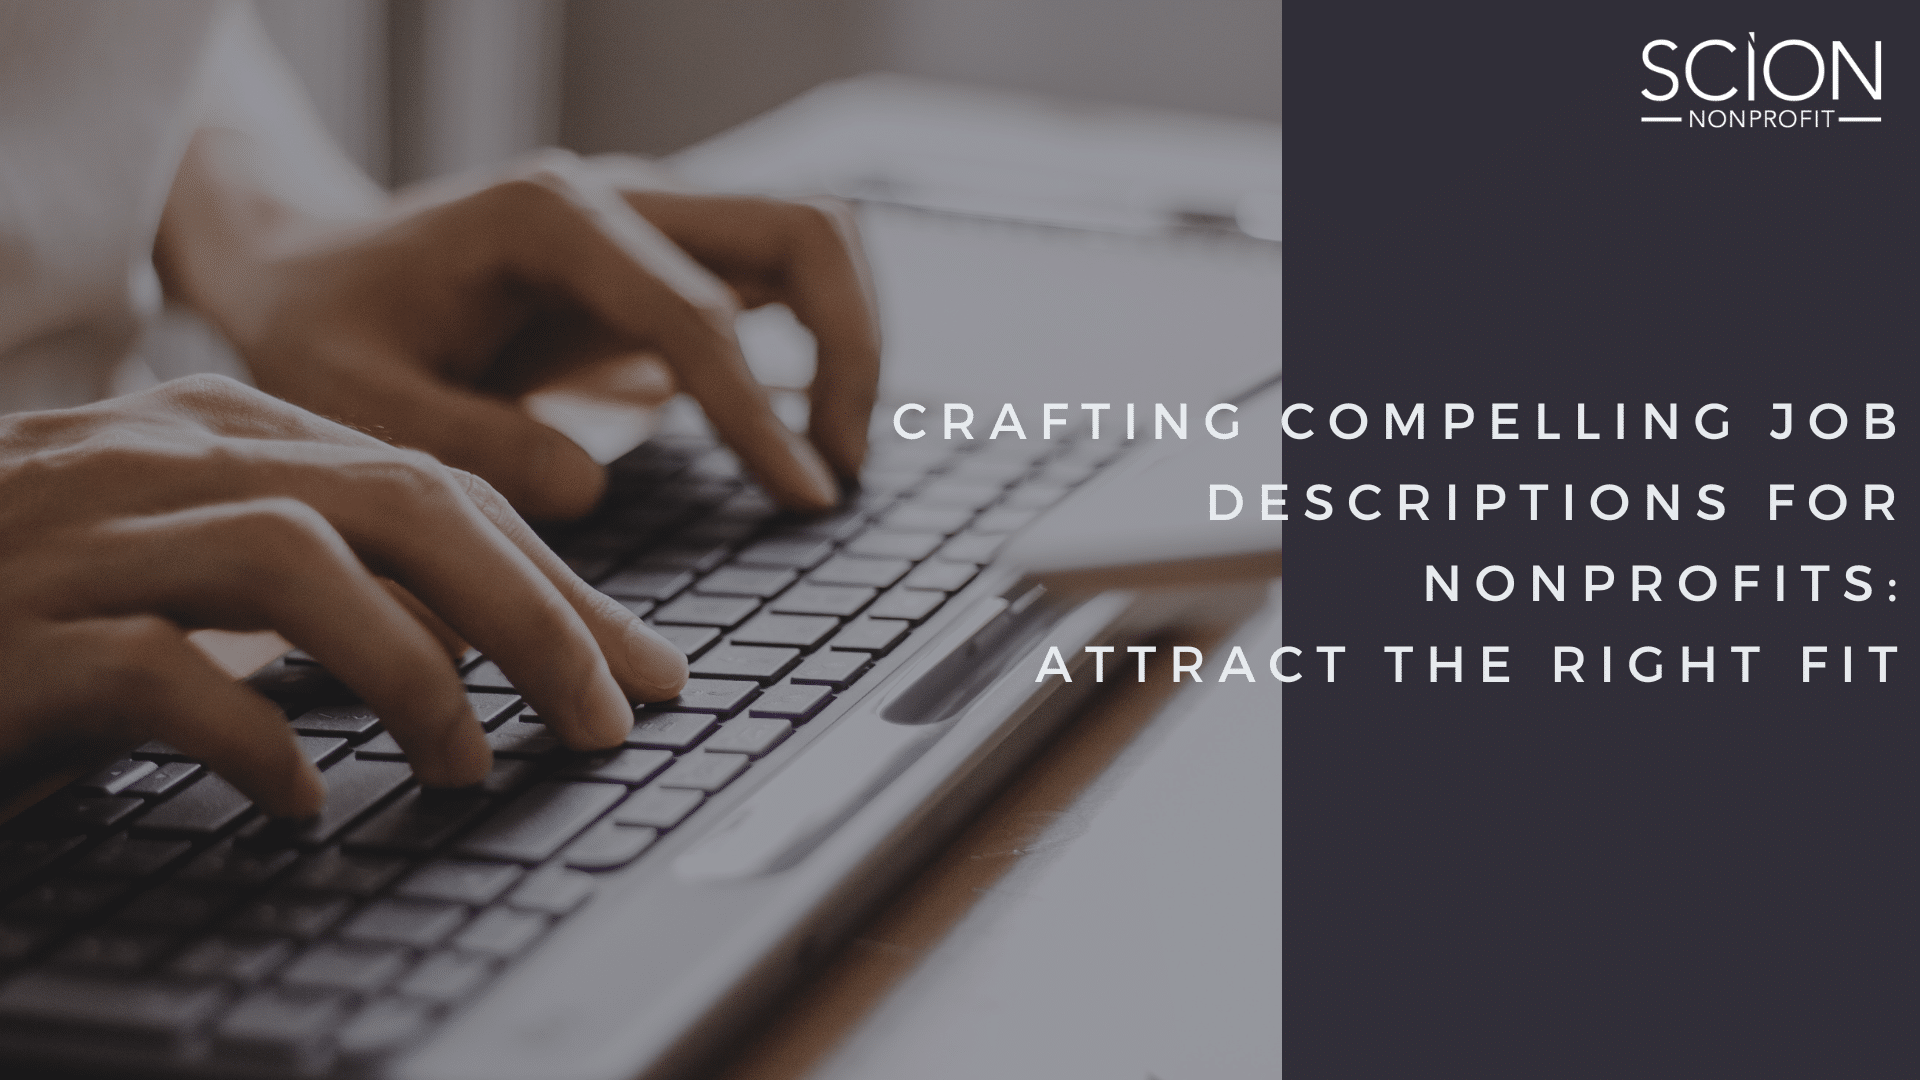 Crafting Compelling Job Descriptions for Nonprofits Attract the Right Fit